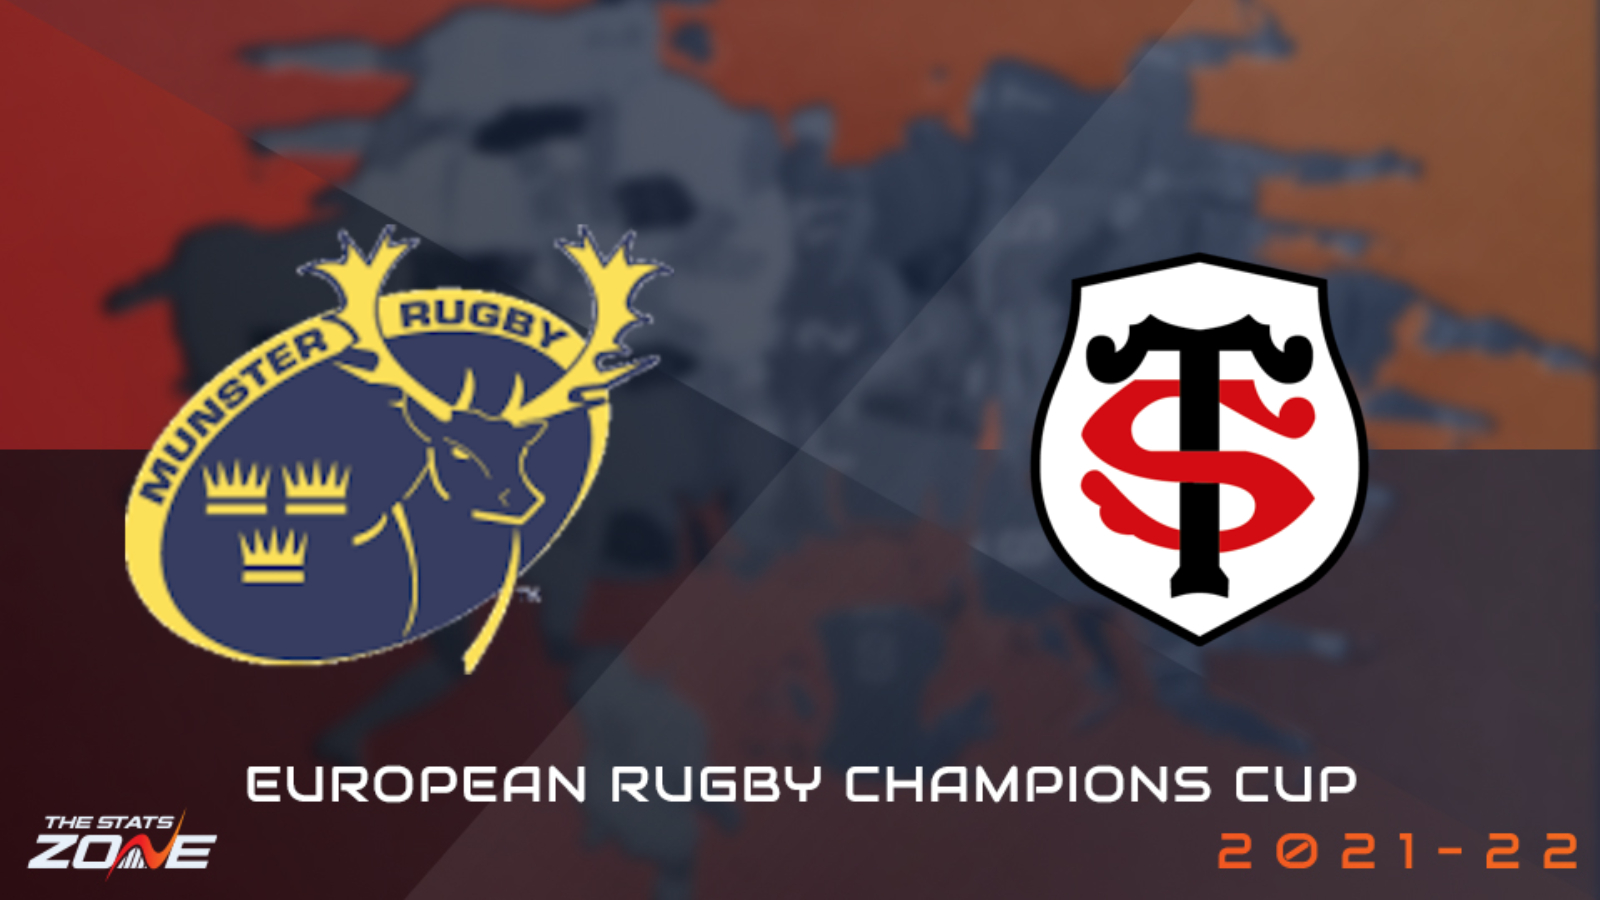 Munster vs Toulouse Preview and Prediction